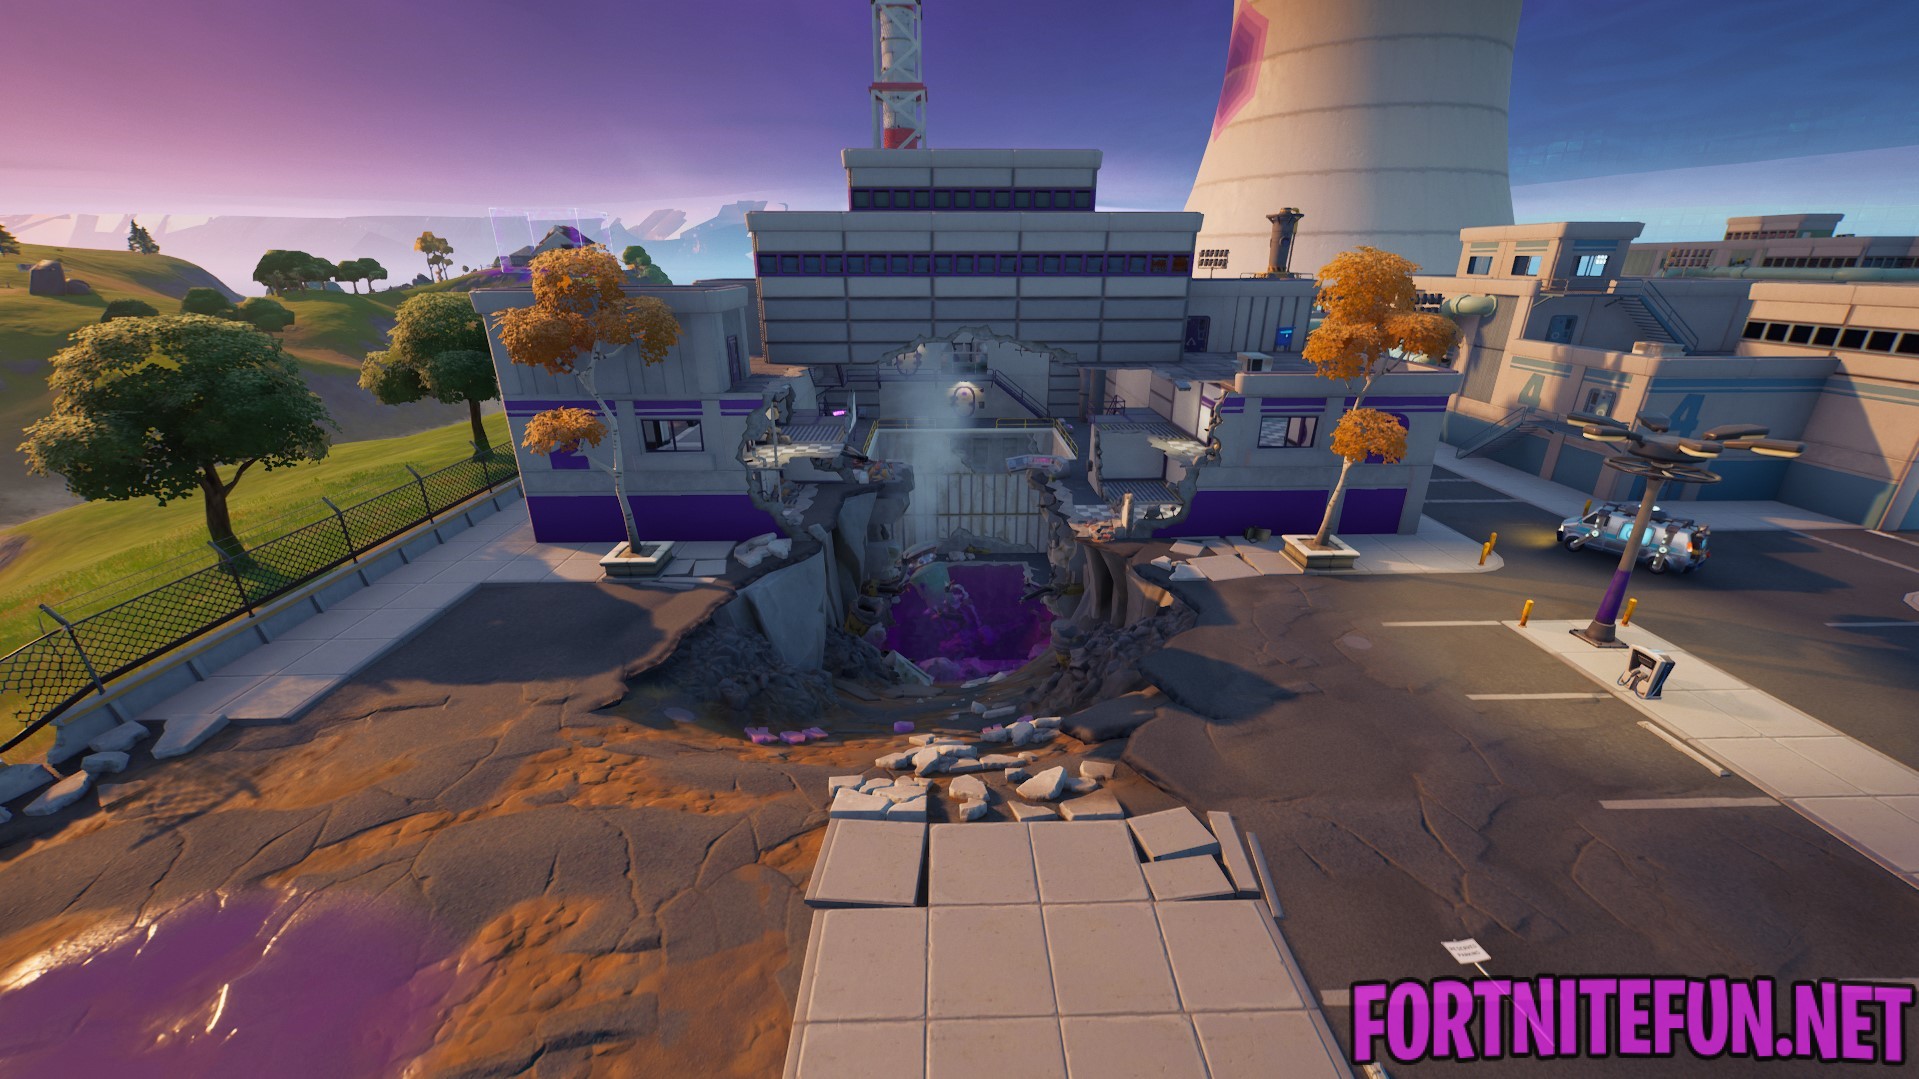 A new cube appeared at Steamy Stacks, and it's different from other Fortnite cubes 